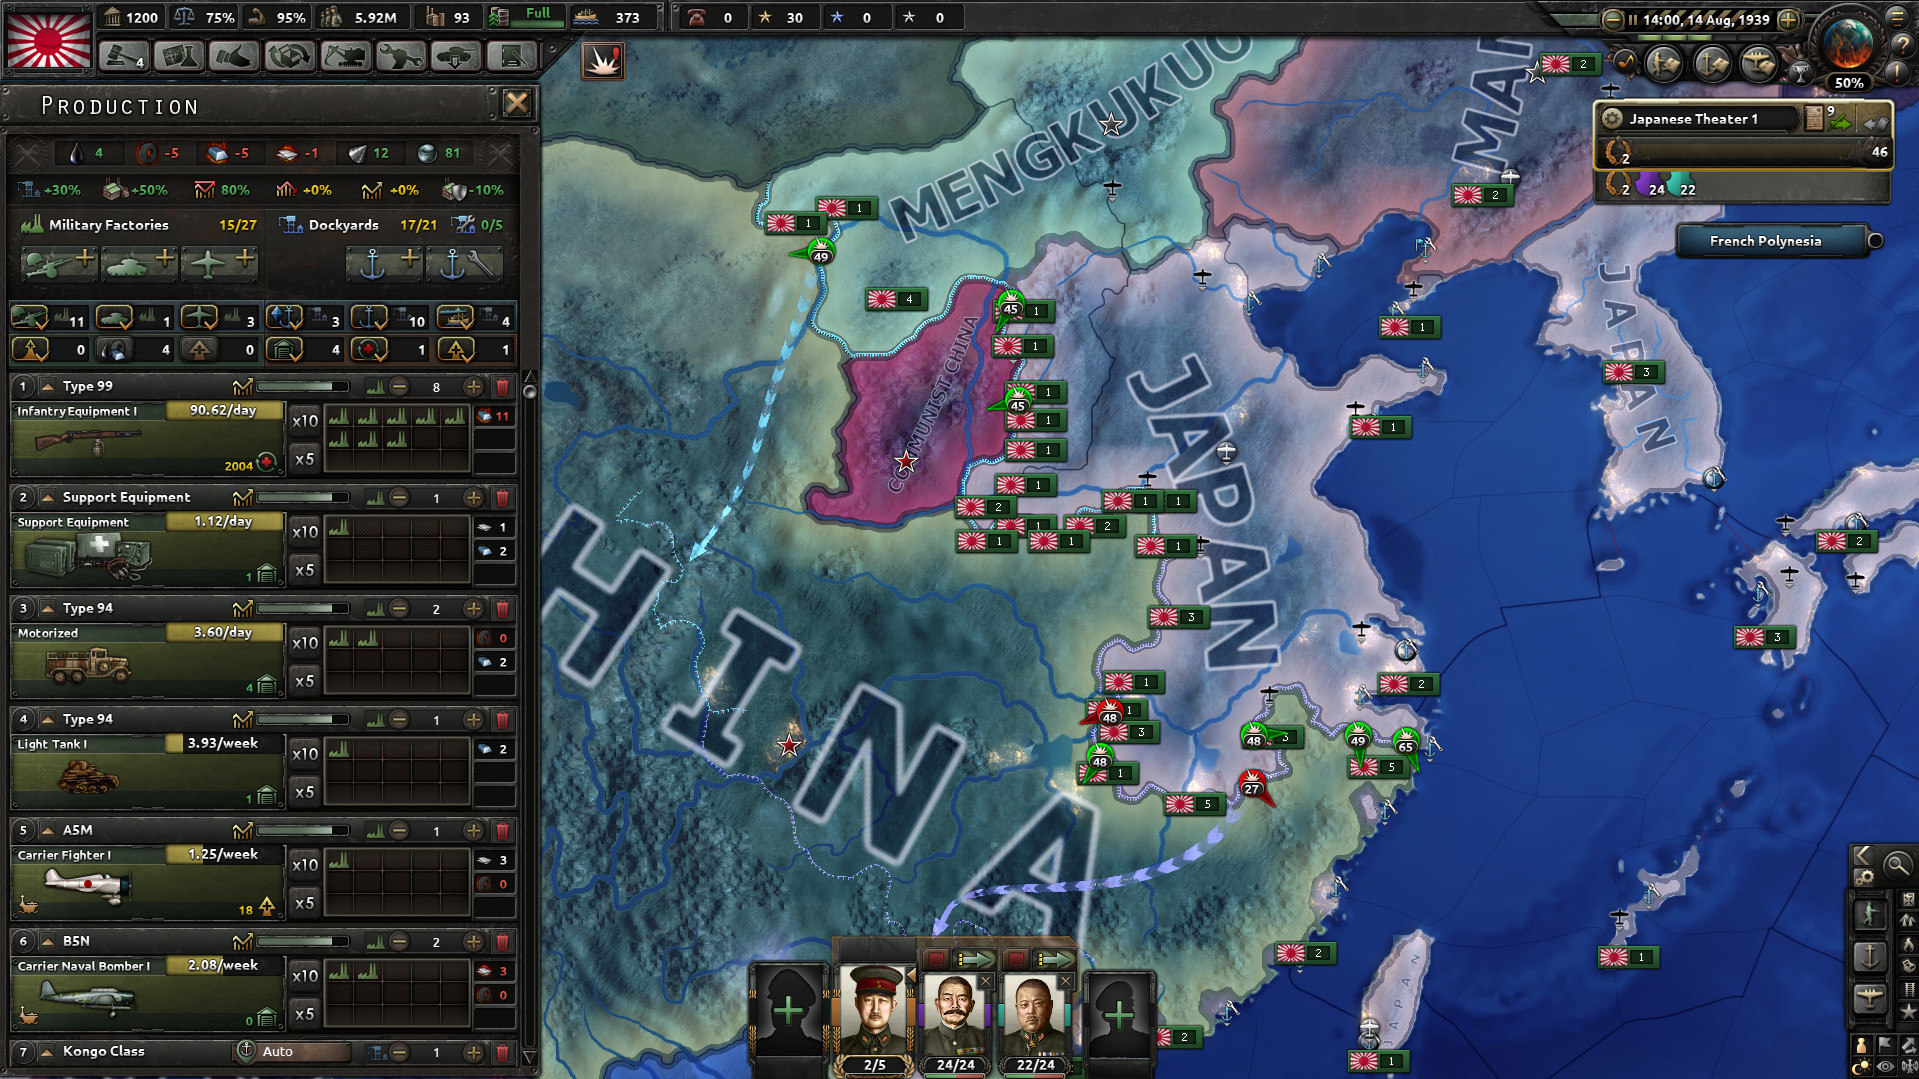 hearts of iron 4 minor nations guide